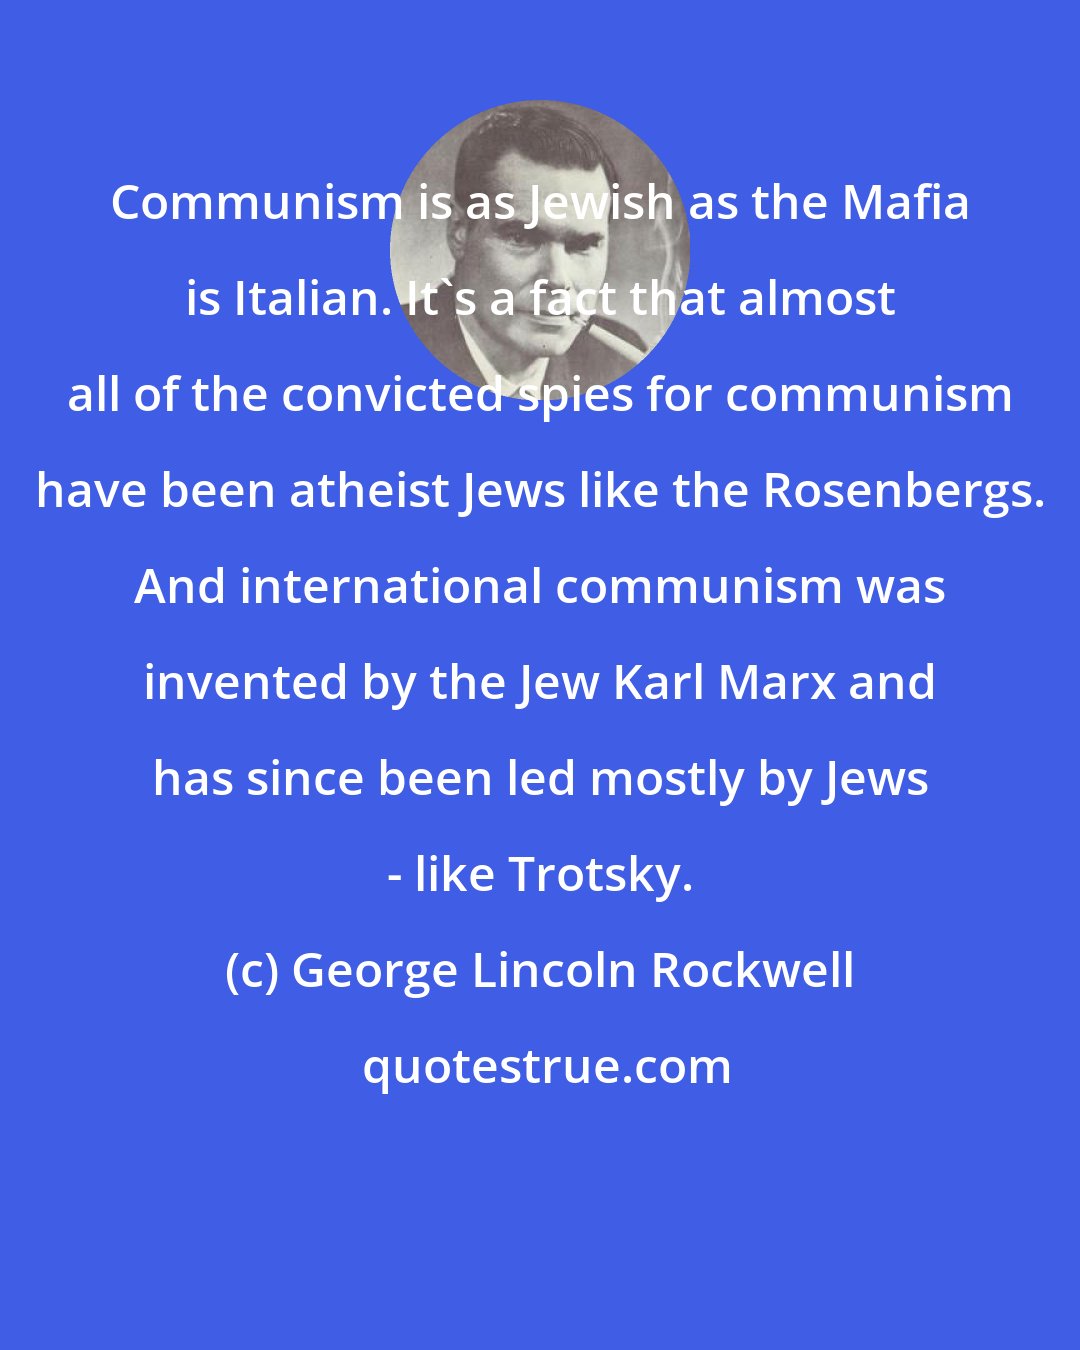 George Lincoln Rockwell: Communism is as Jewish as the Mafia is Italian. It's a fact that almost all of the convicted spies for communism have been atheist Jews like the Rosenbergs. And international communism was invented by the Jew Karl Marx and has since been led mostly by Jews - like Trotsky.